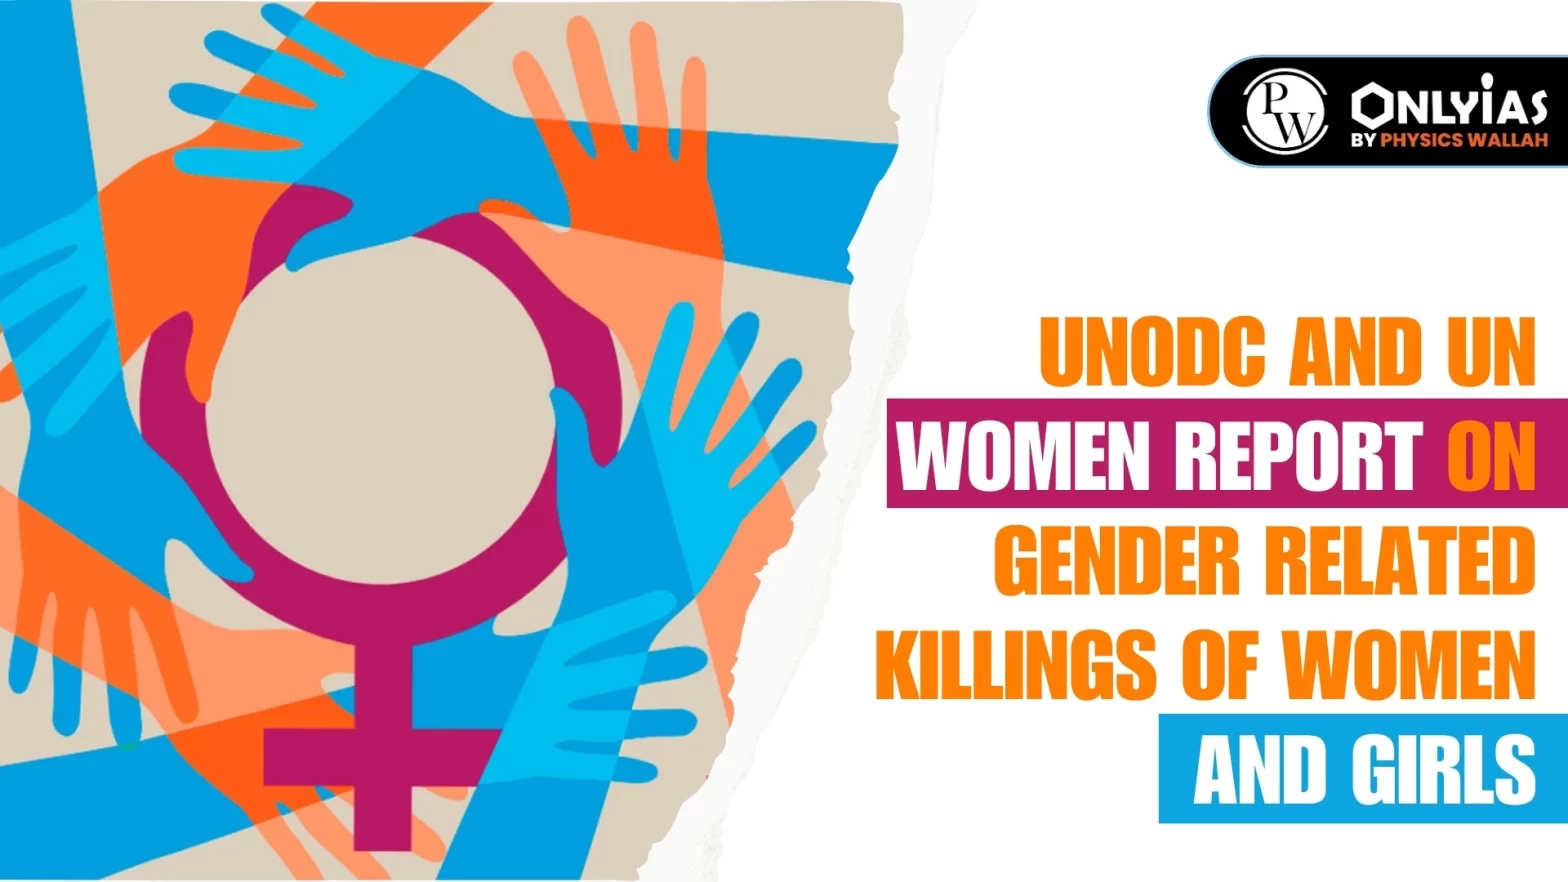 UNODC and UN Women Report on Gender Related Killings Of Women And Girls